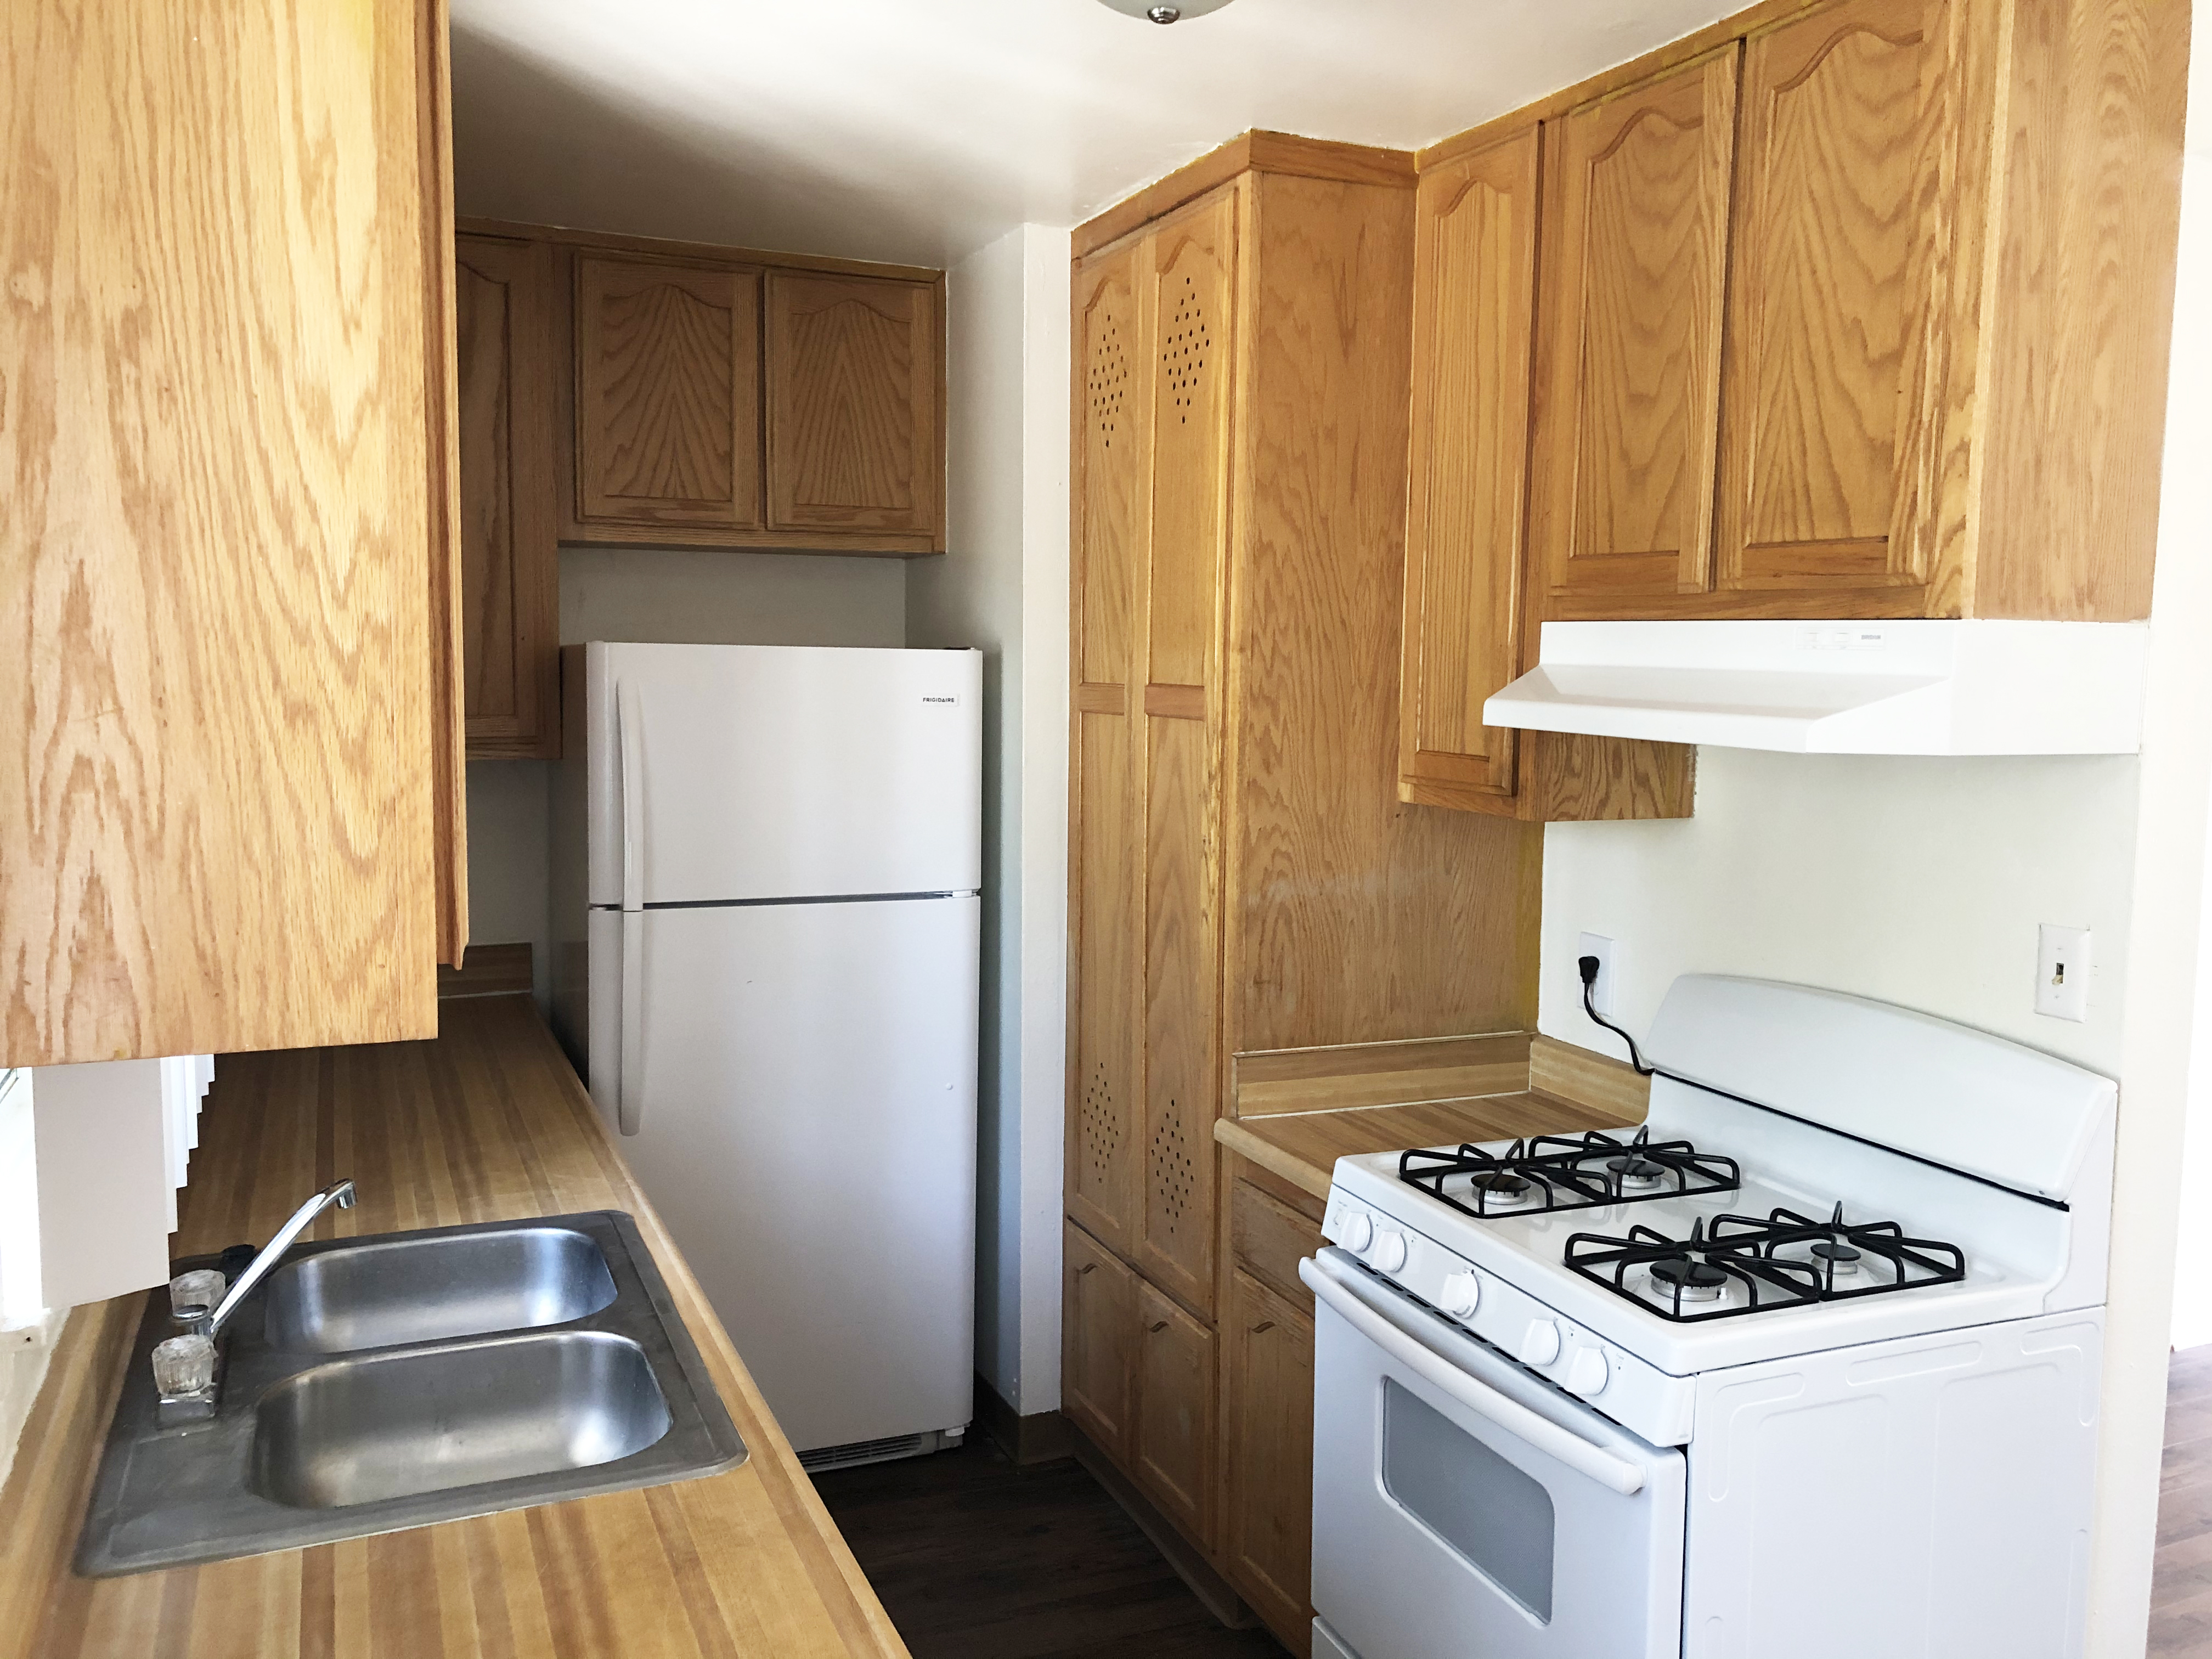 Interior view of a kitchen in a unit showing a stove, refrigerator, sink and cabinets.